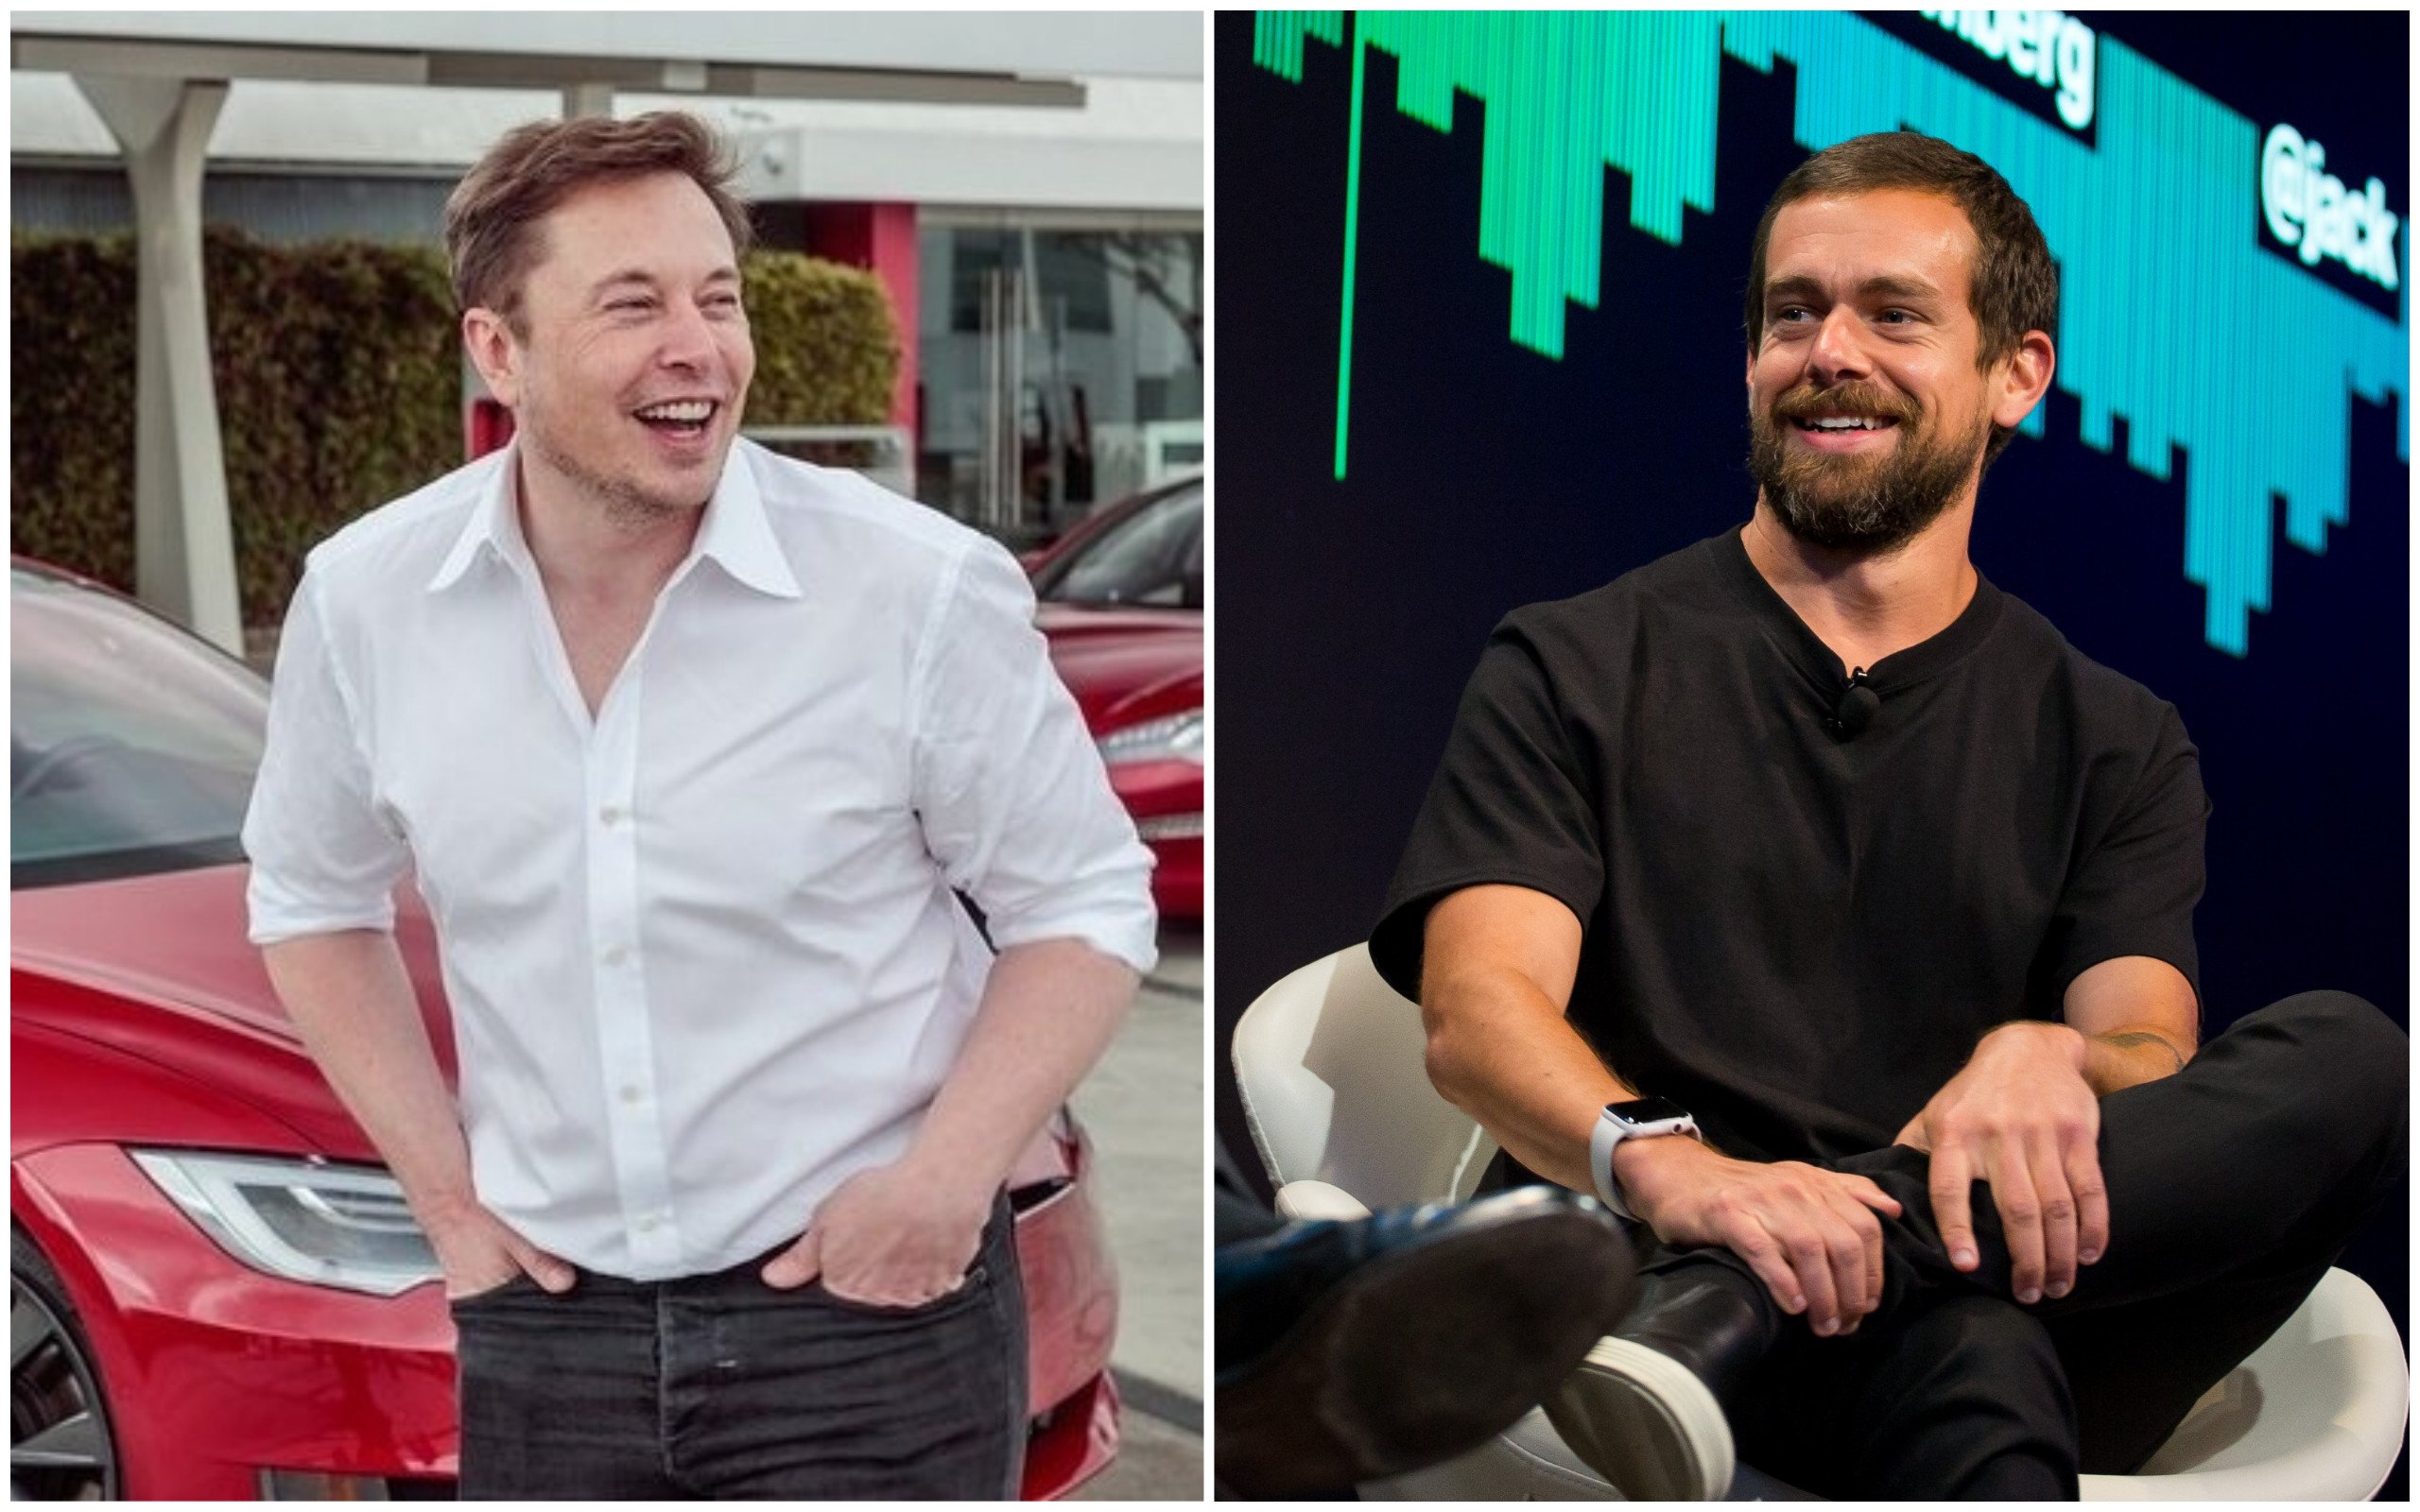 Elon Musk supported Jack Dorsey in his difficult times